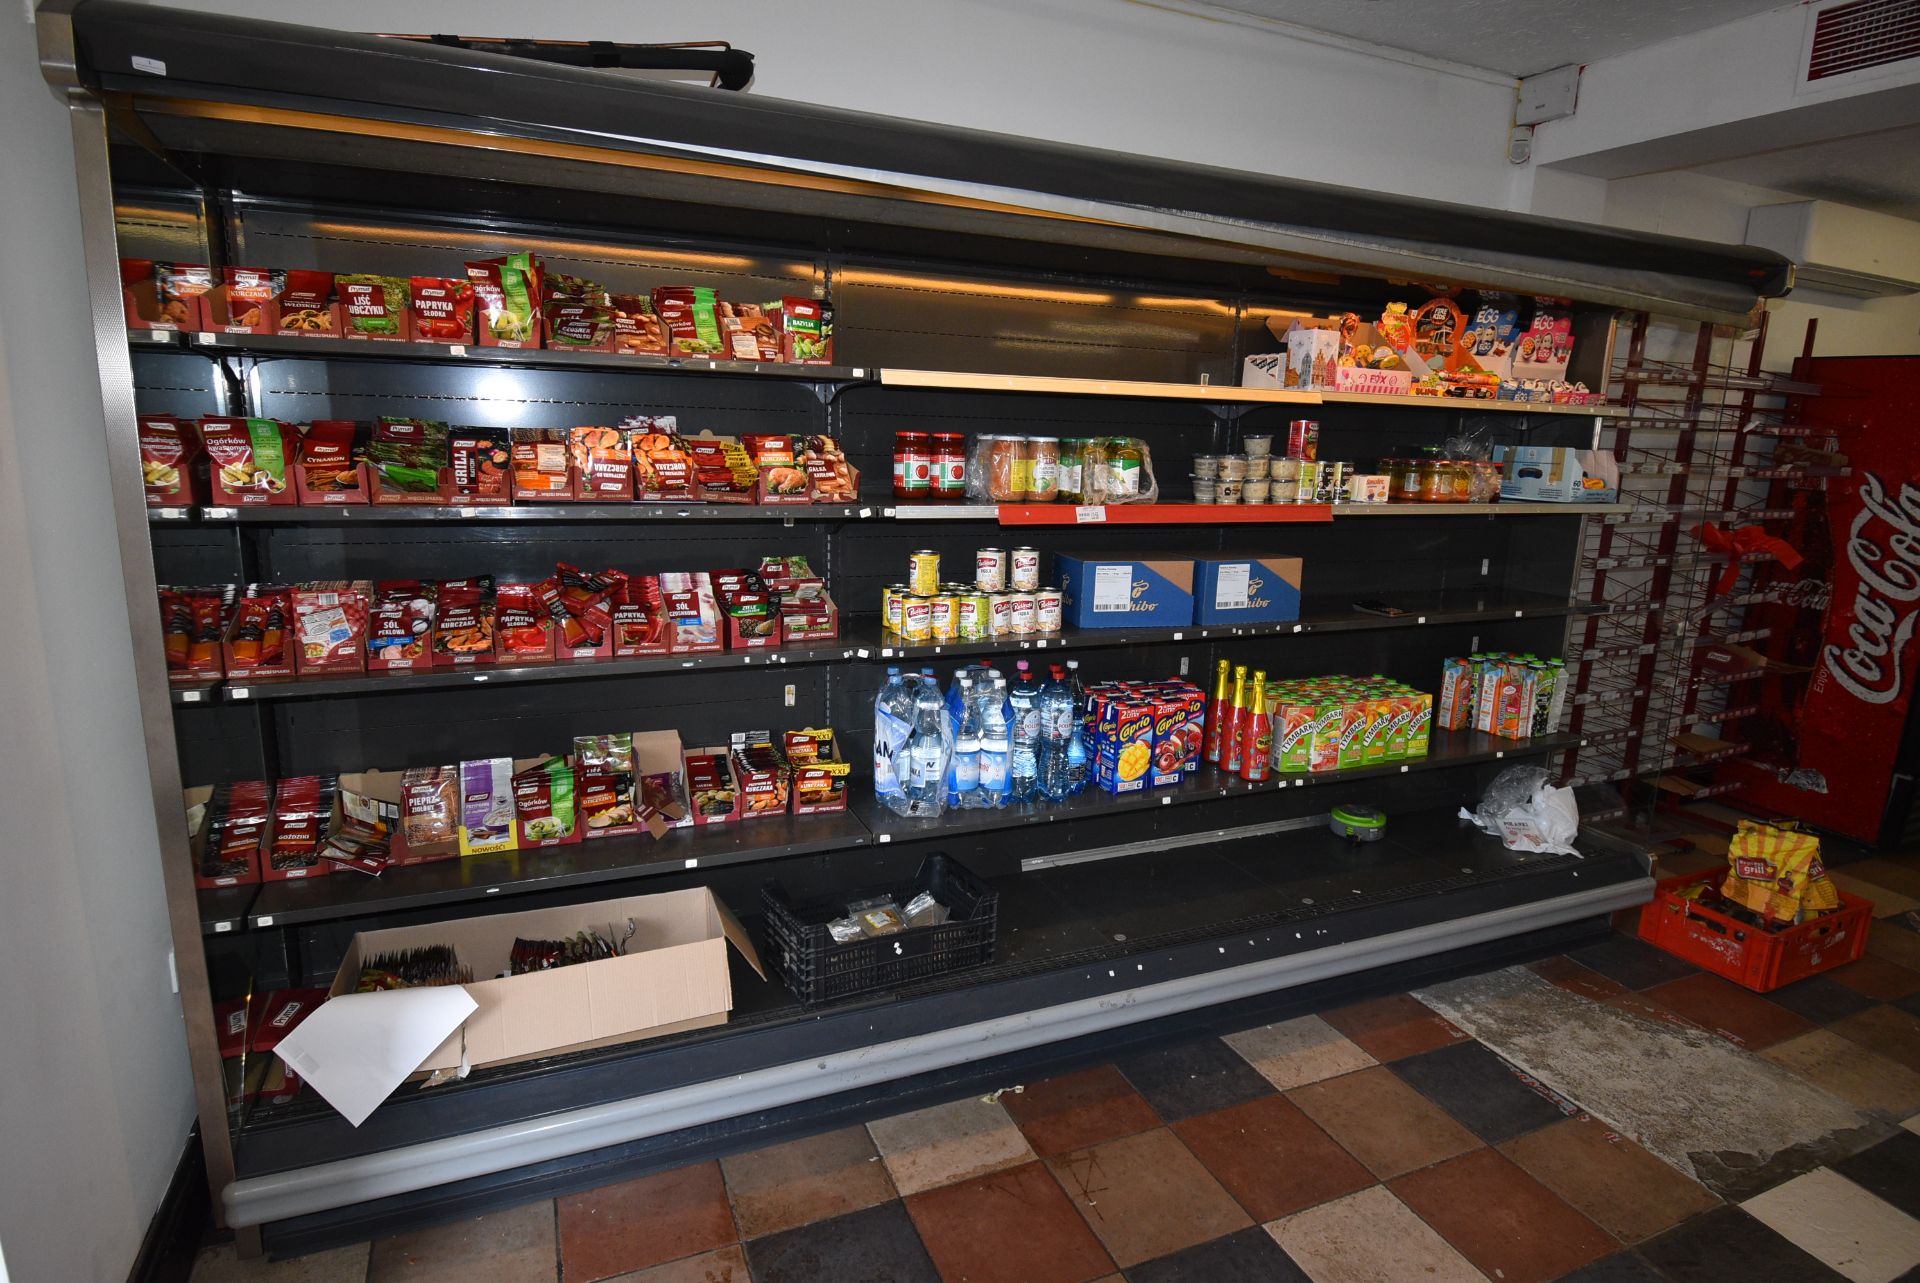 Arneg Berlino 3CLF Open Fronted Multideck Refrigerated Display Unit with External Compressor, and